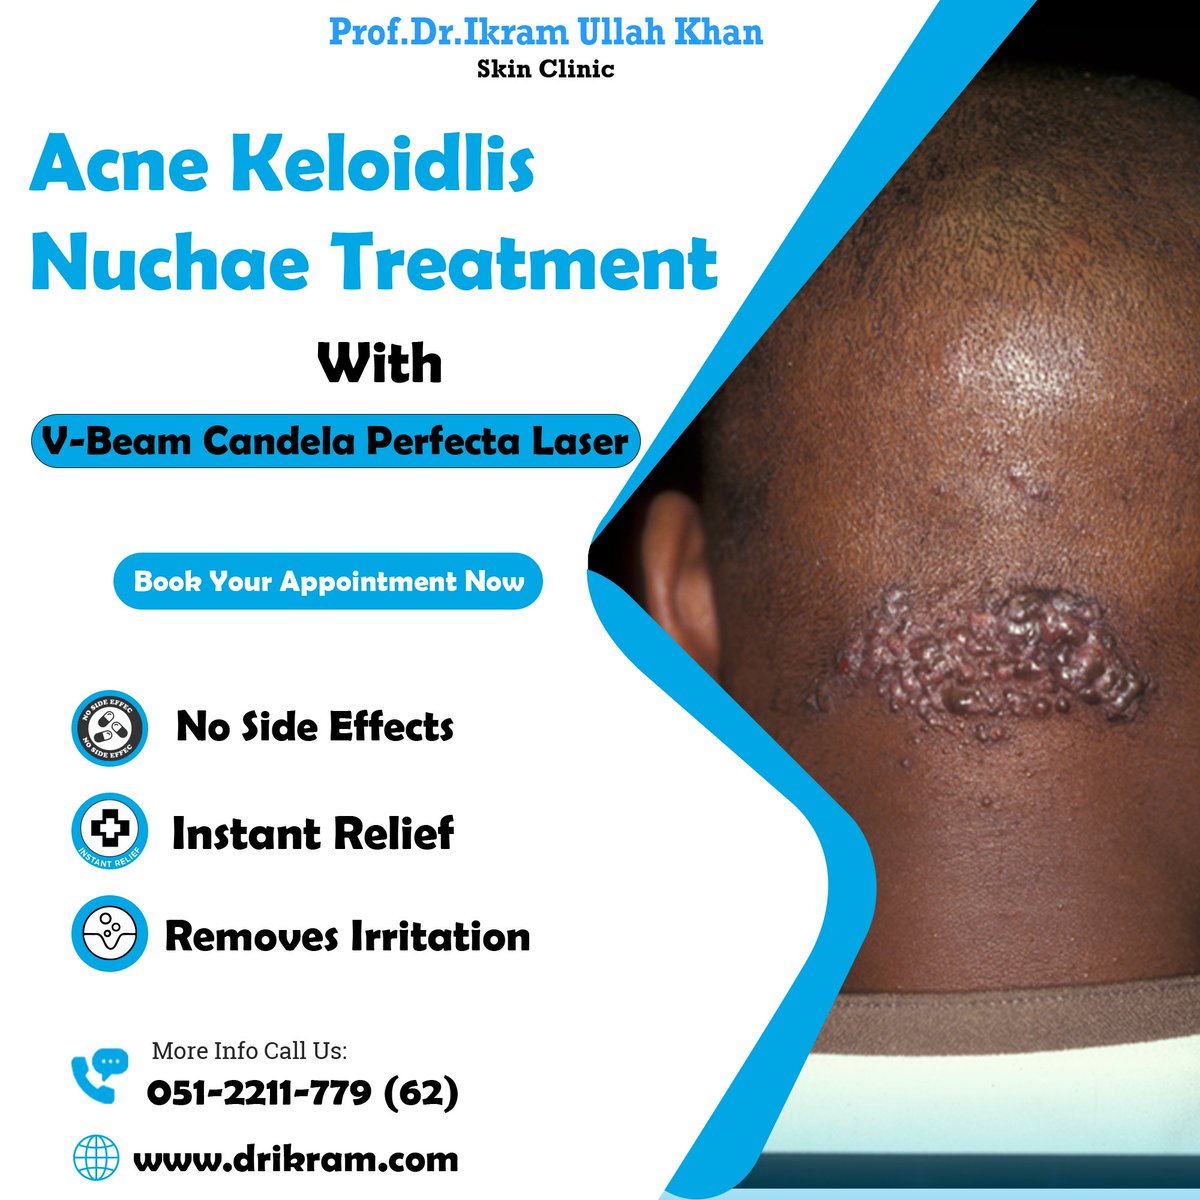 Say goodbye to Acne Keloidalis Nuchae with the powerful V-Beam Candela Perfecta laser! 🌟
Book an appointment with Prof. Dr. Ikram Ullah Khan Skin Clinic 
Call us at 051-2211779,051-2211762,0334-8582829

#AcneKeloidalisNuchae #VBeamLaser #ProfIkramUllahKhan #ClearSkin #Confidence